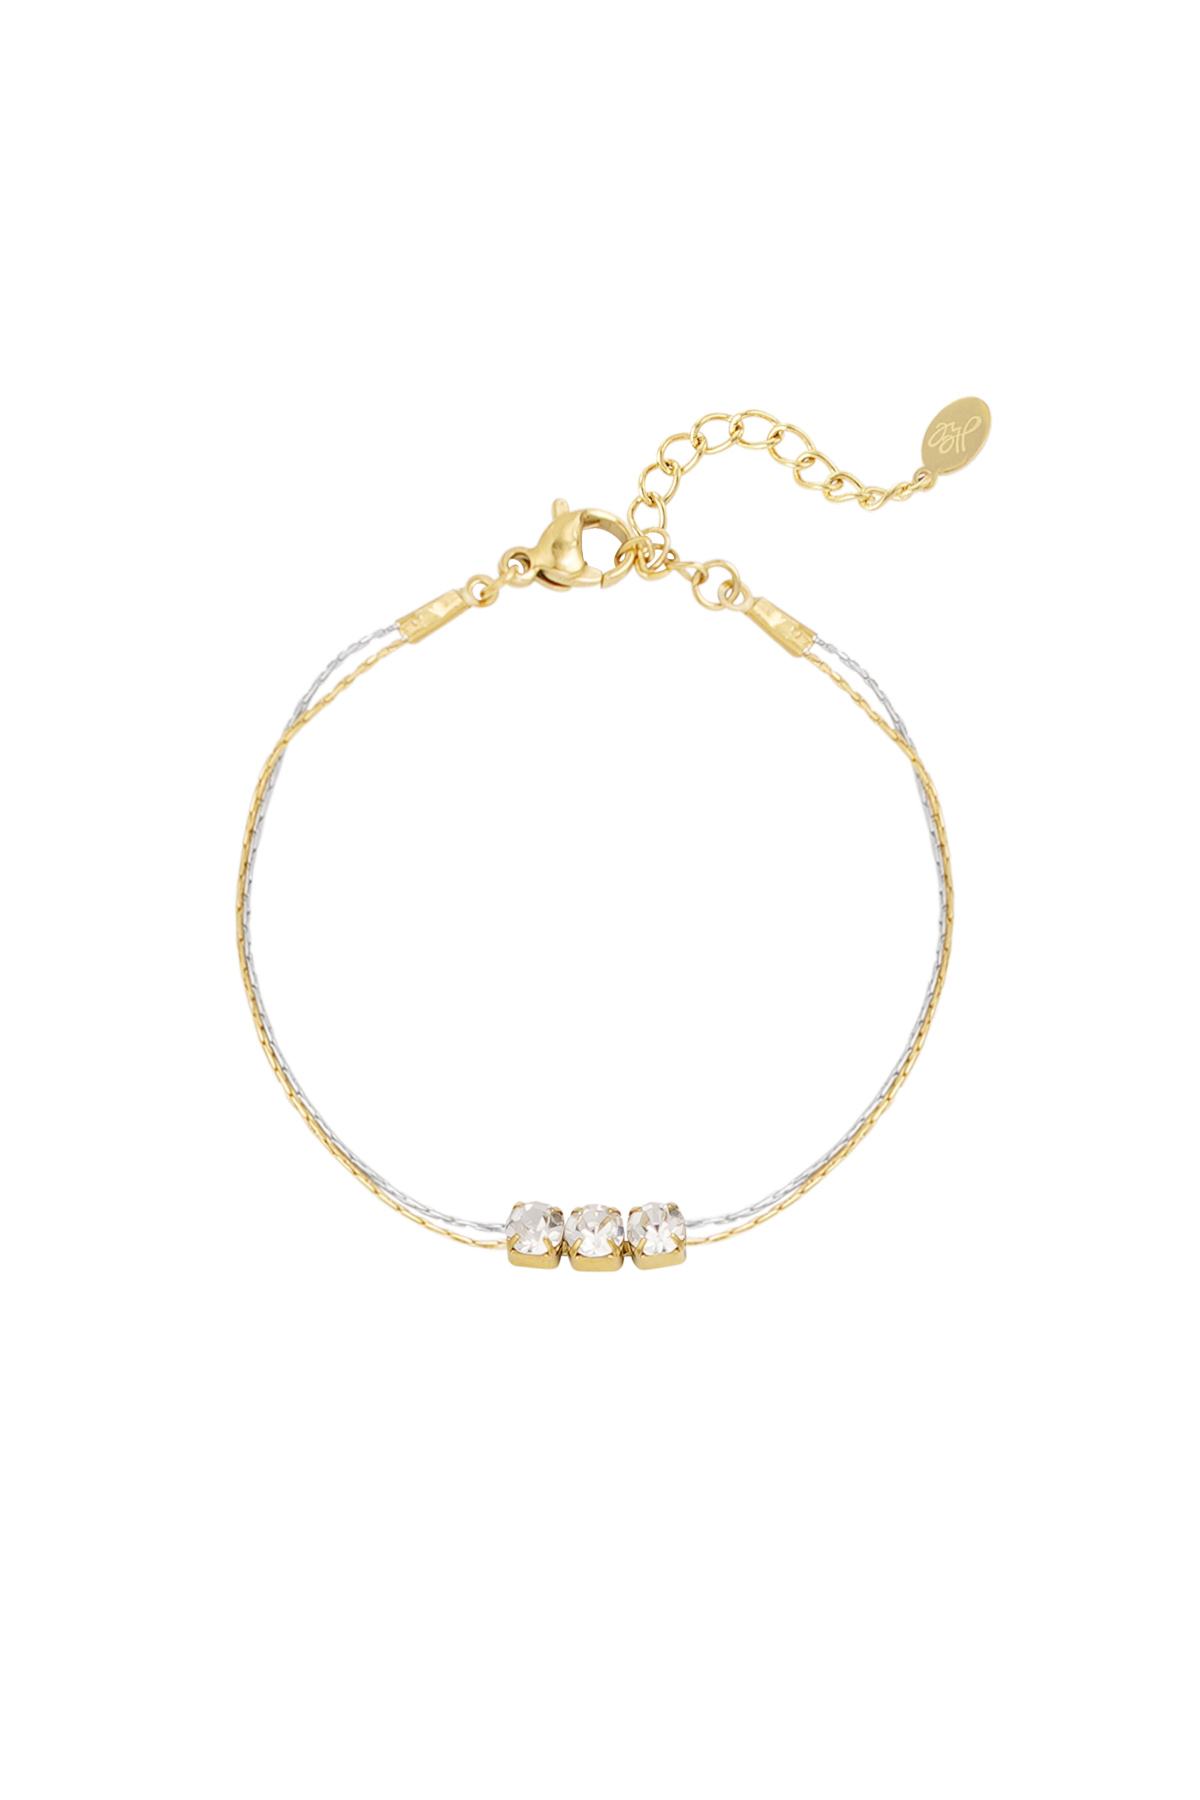 Bracelet gold/silver with stone - white h5 